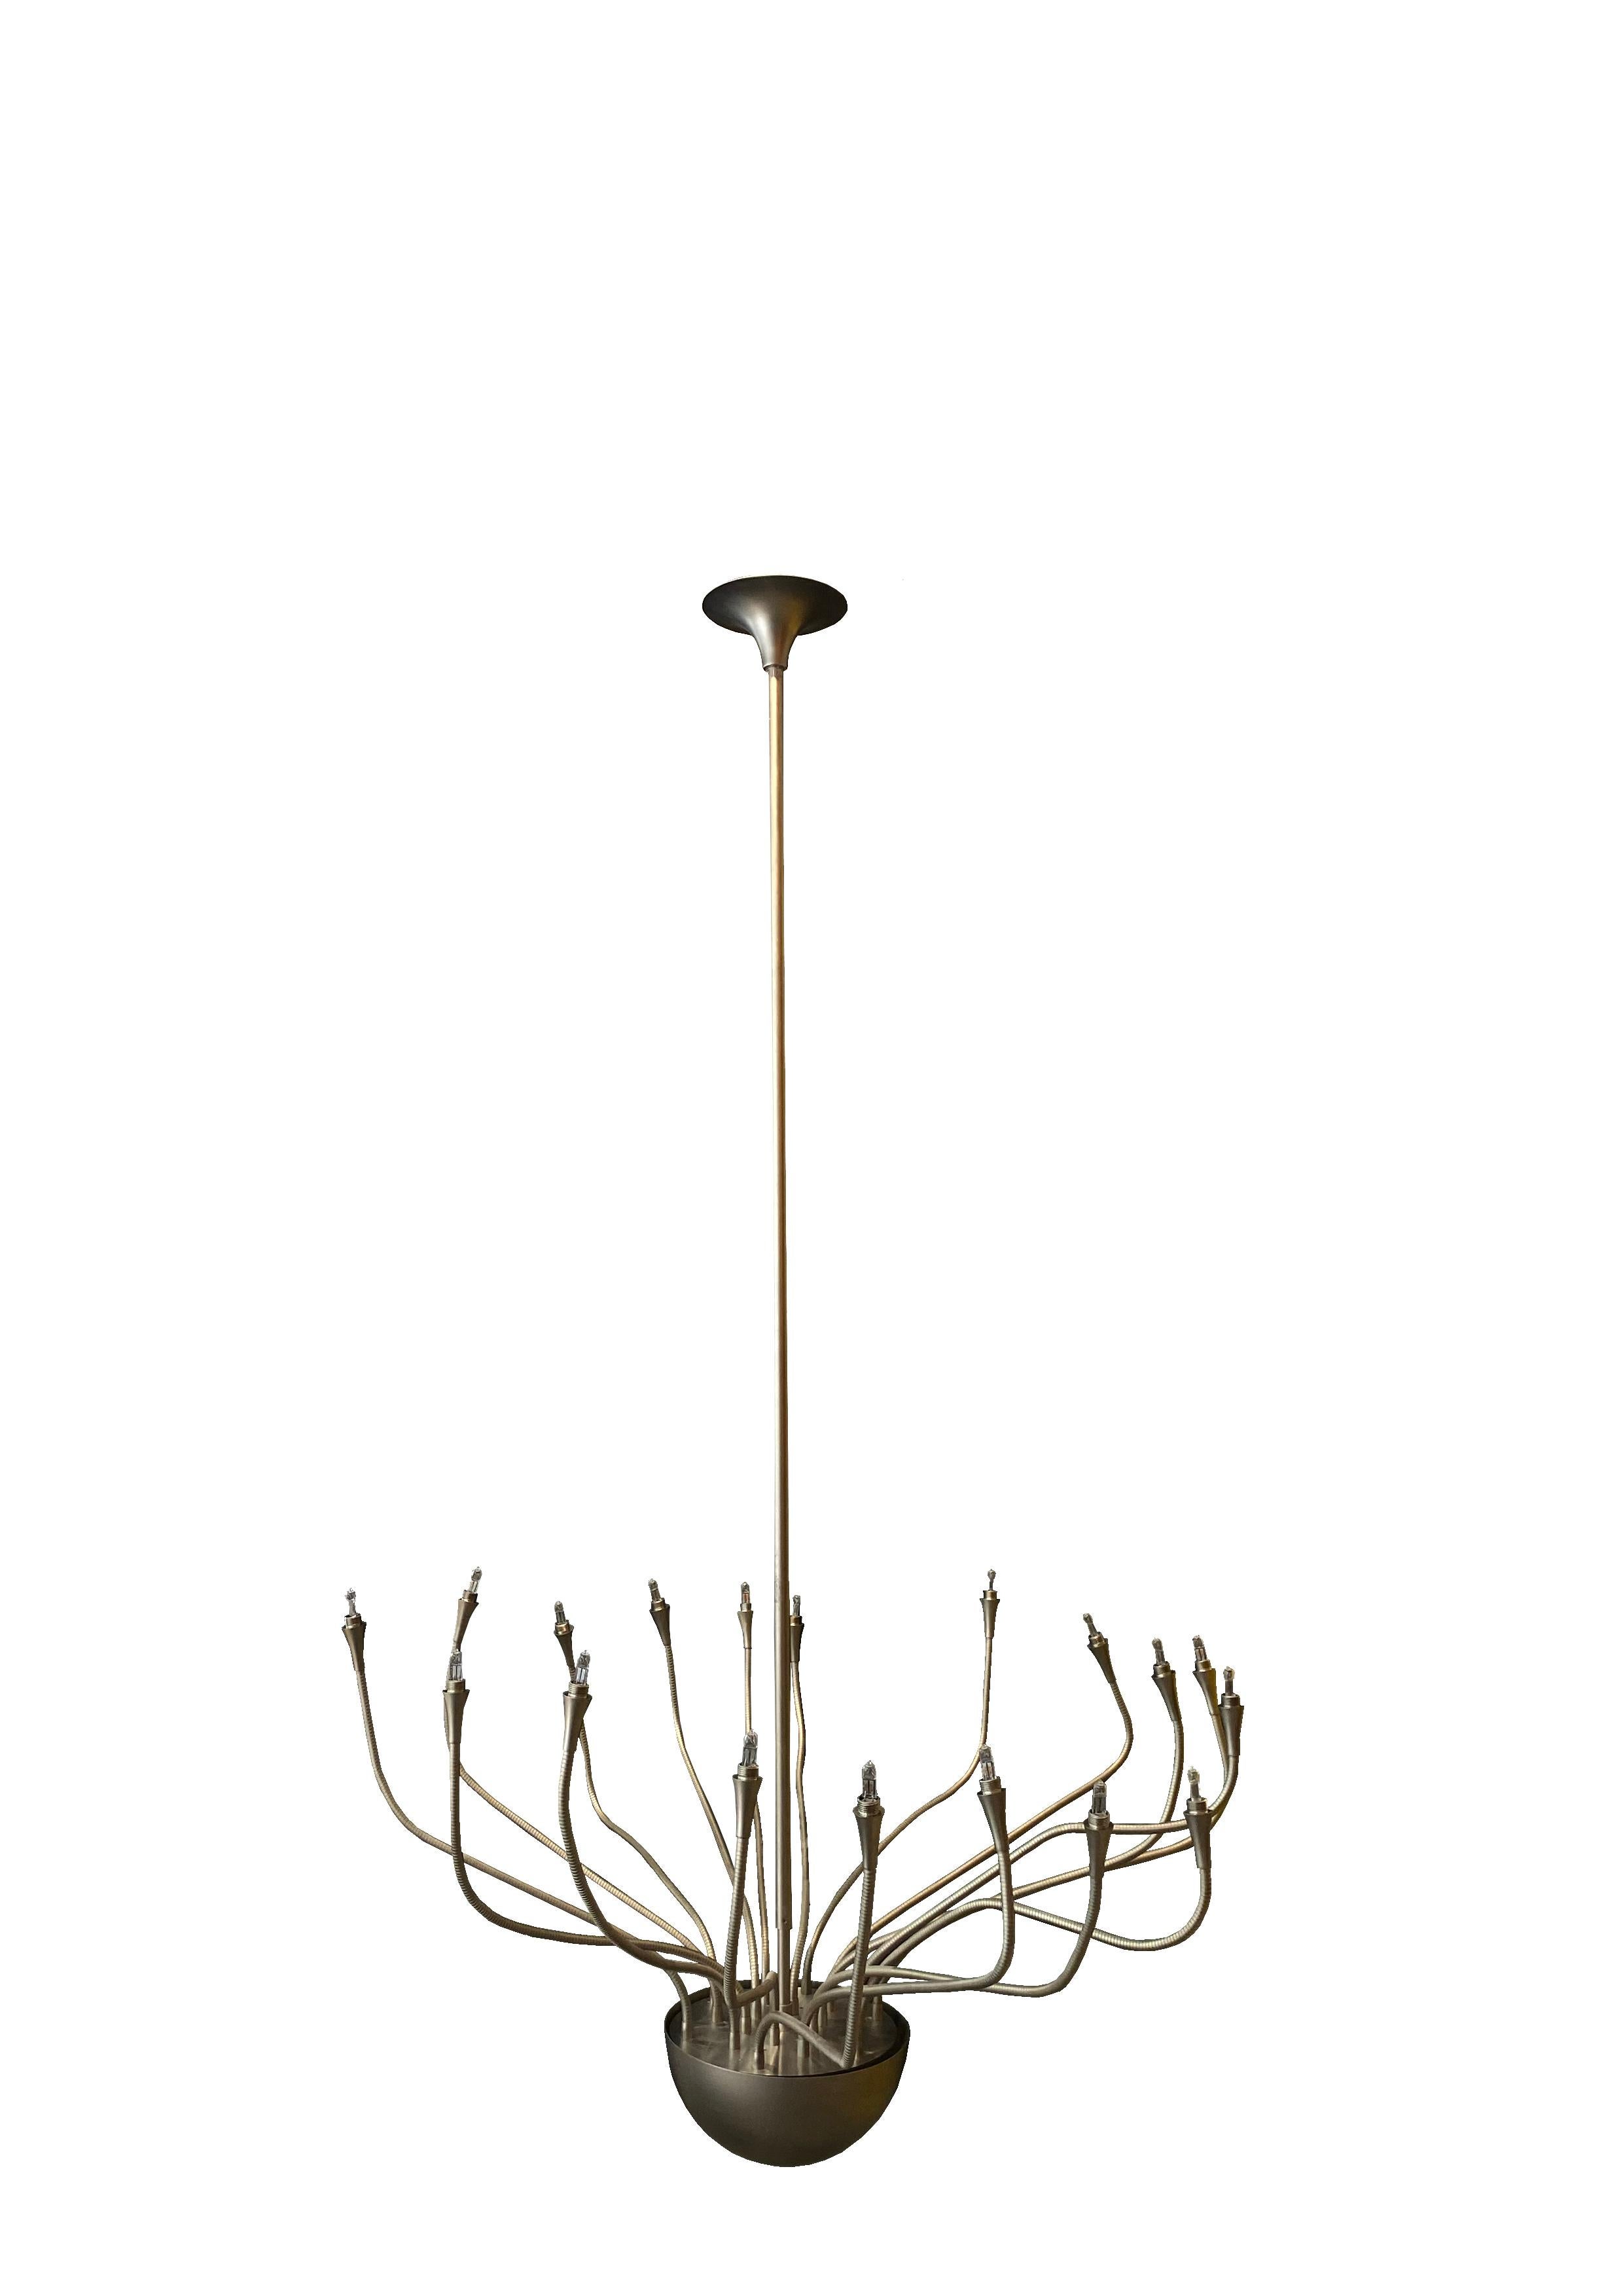 Modern Mid-Century Silver Medusa Chandelier by Florian Schulz, Germany, 1984 For Sale